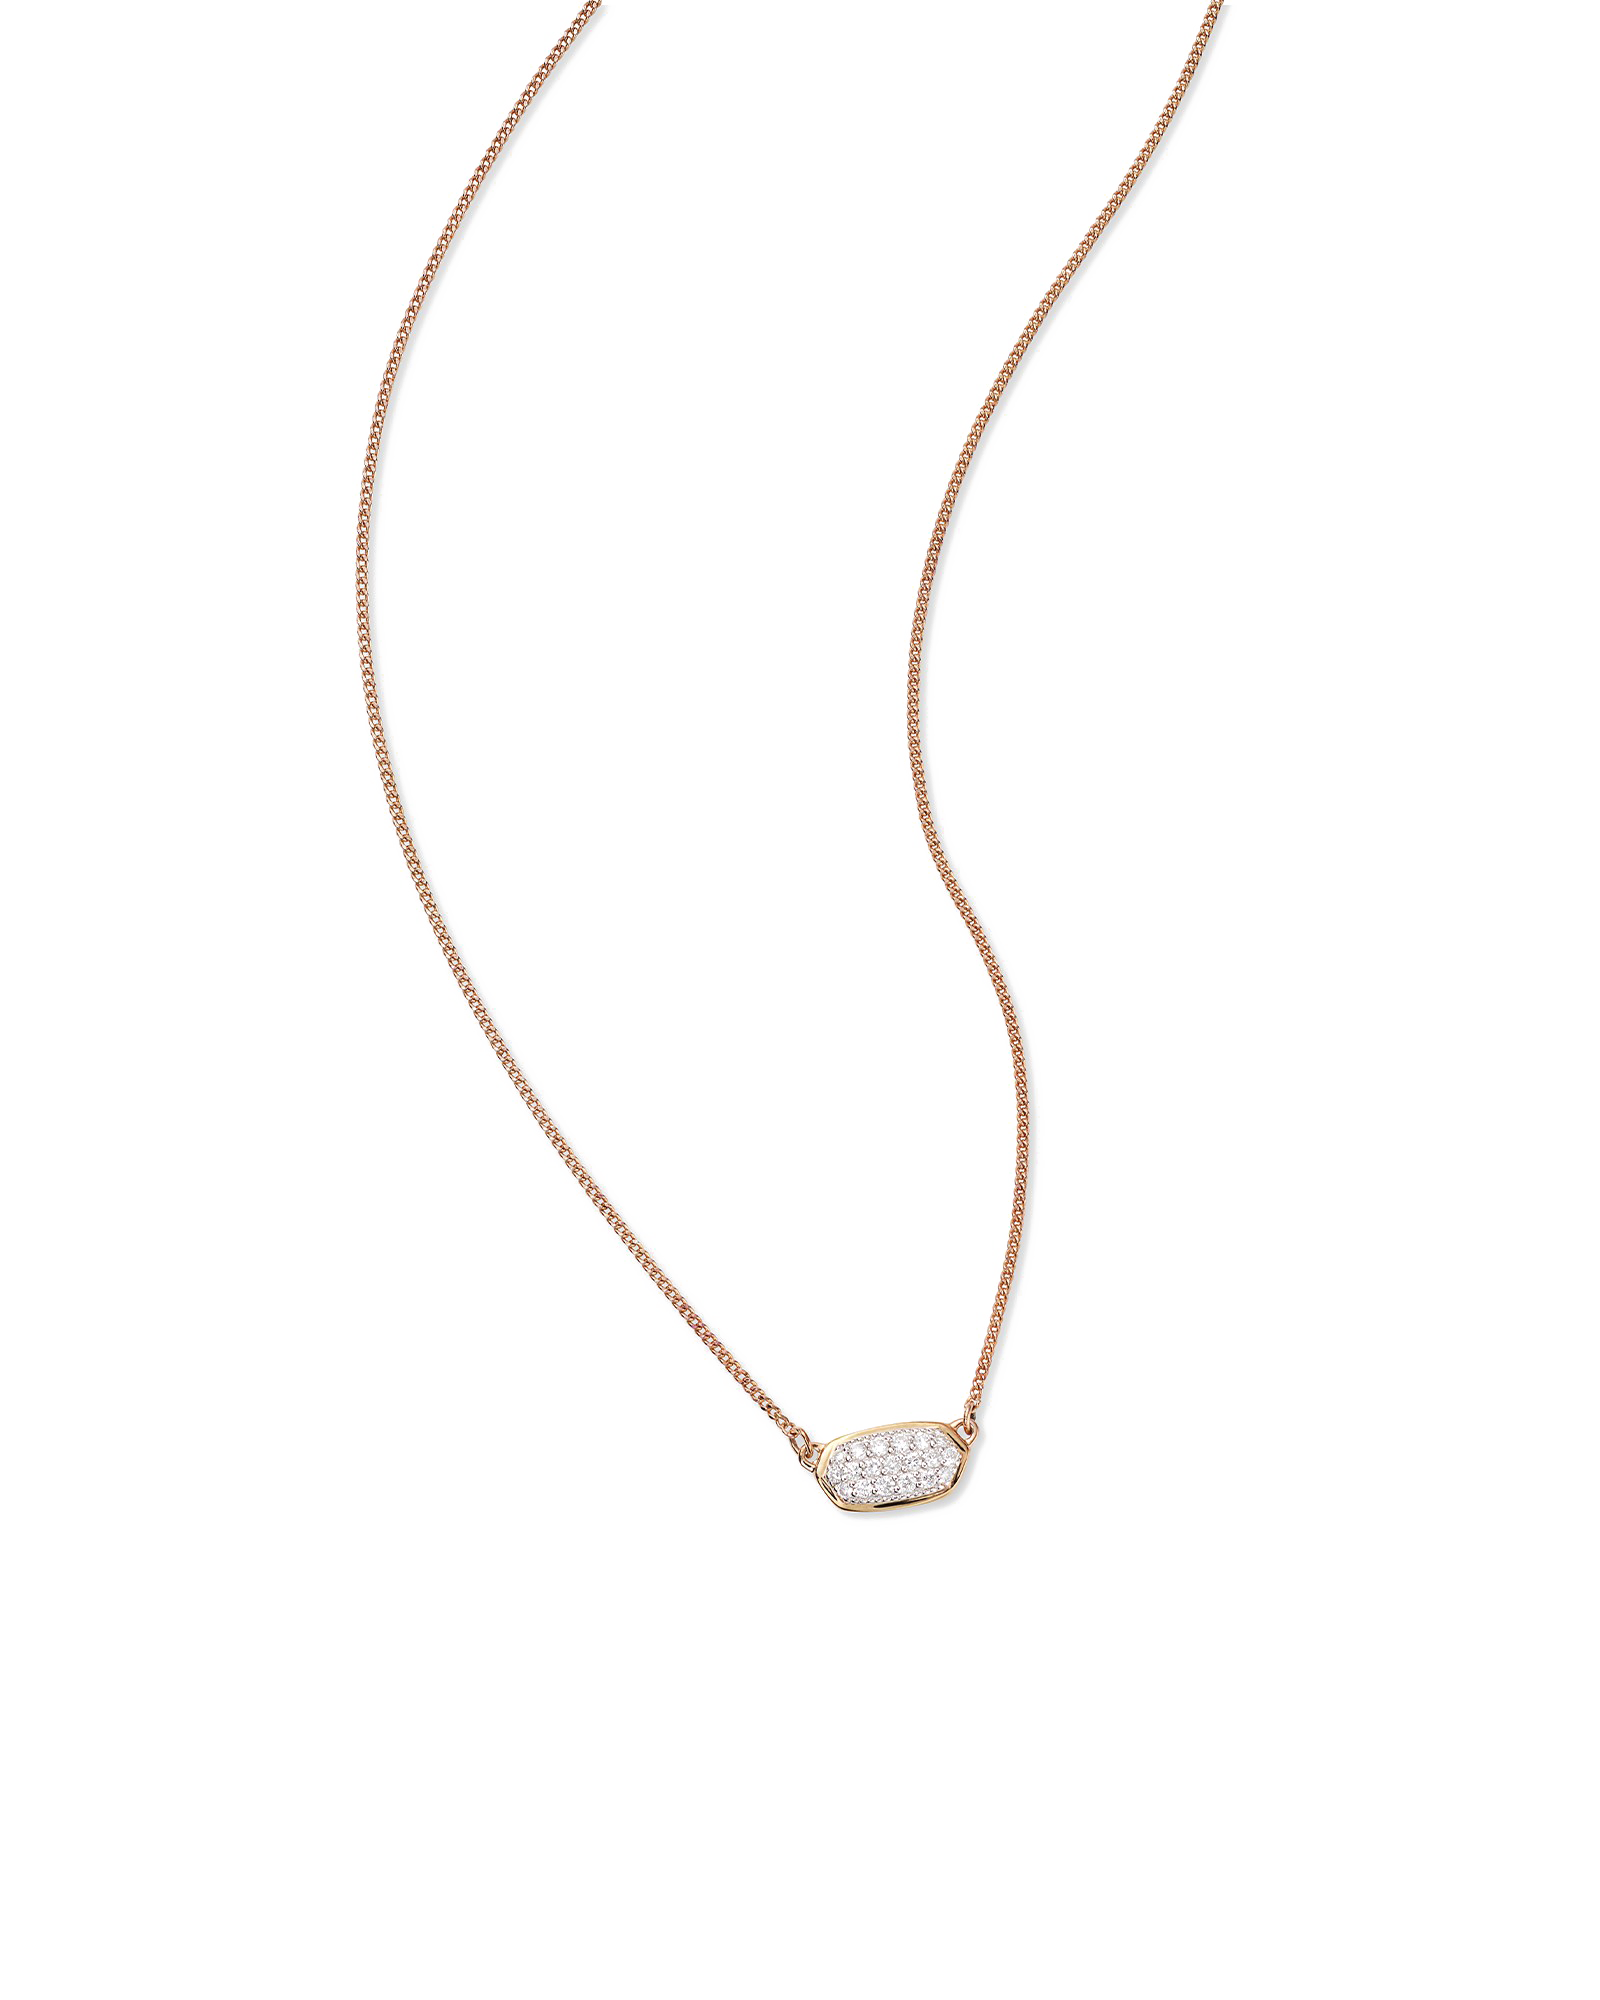 necklace clipart clear background